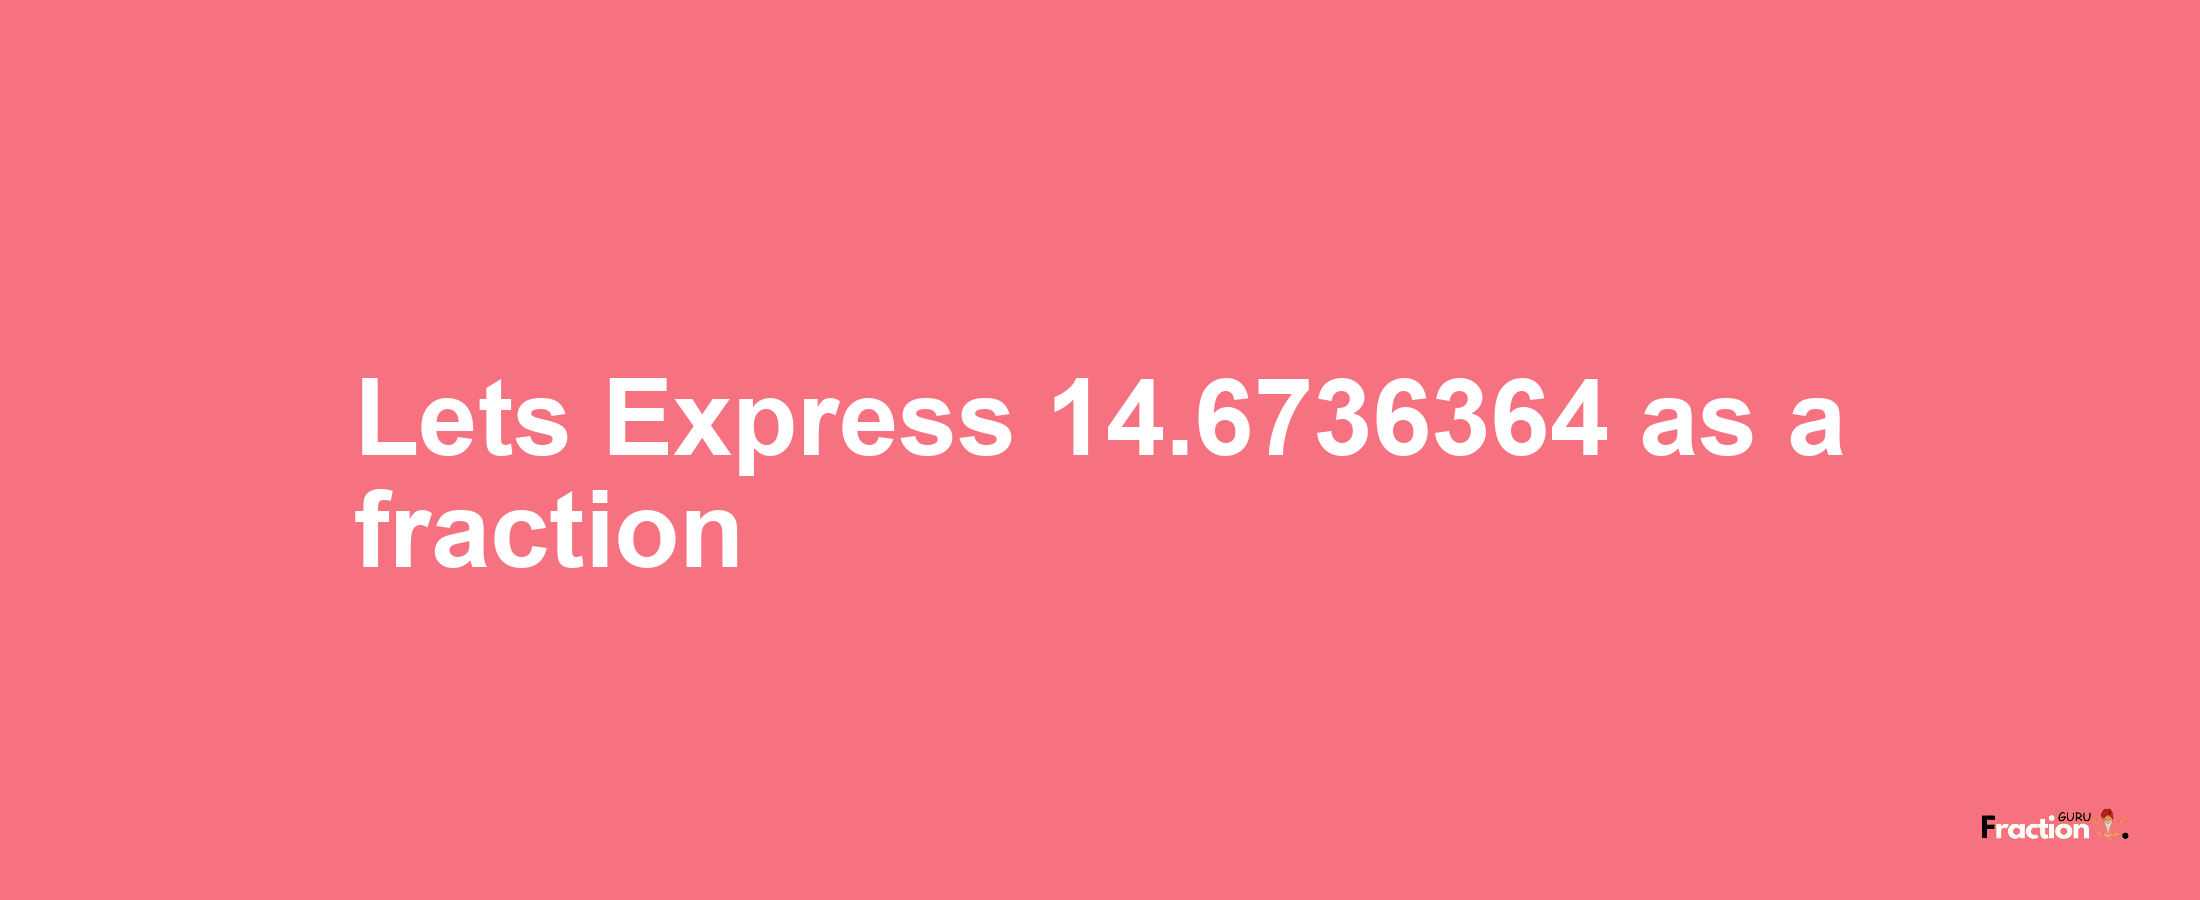 Lets Express 14.6736364 as afraction